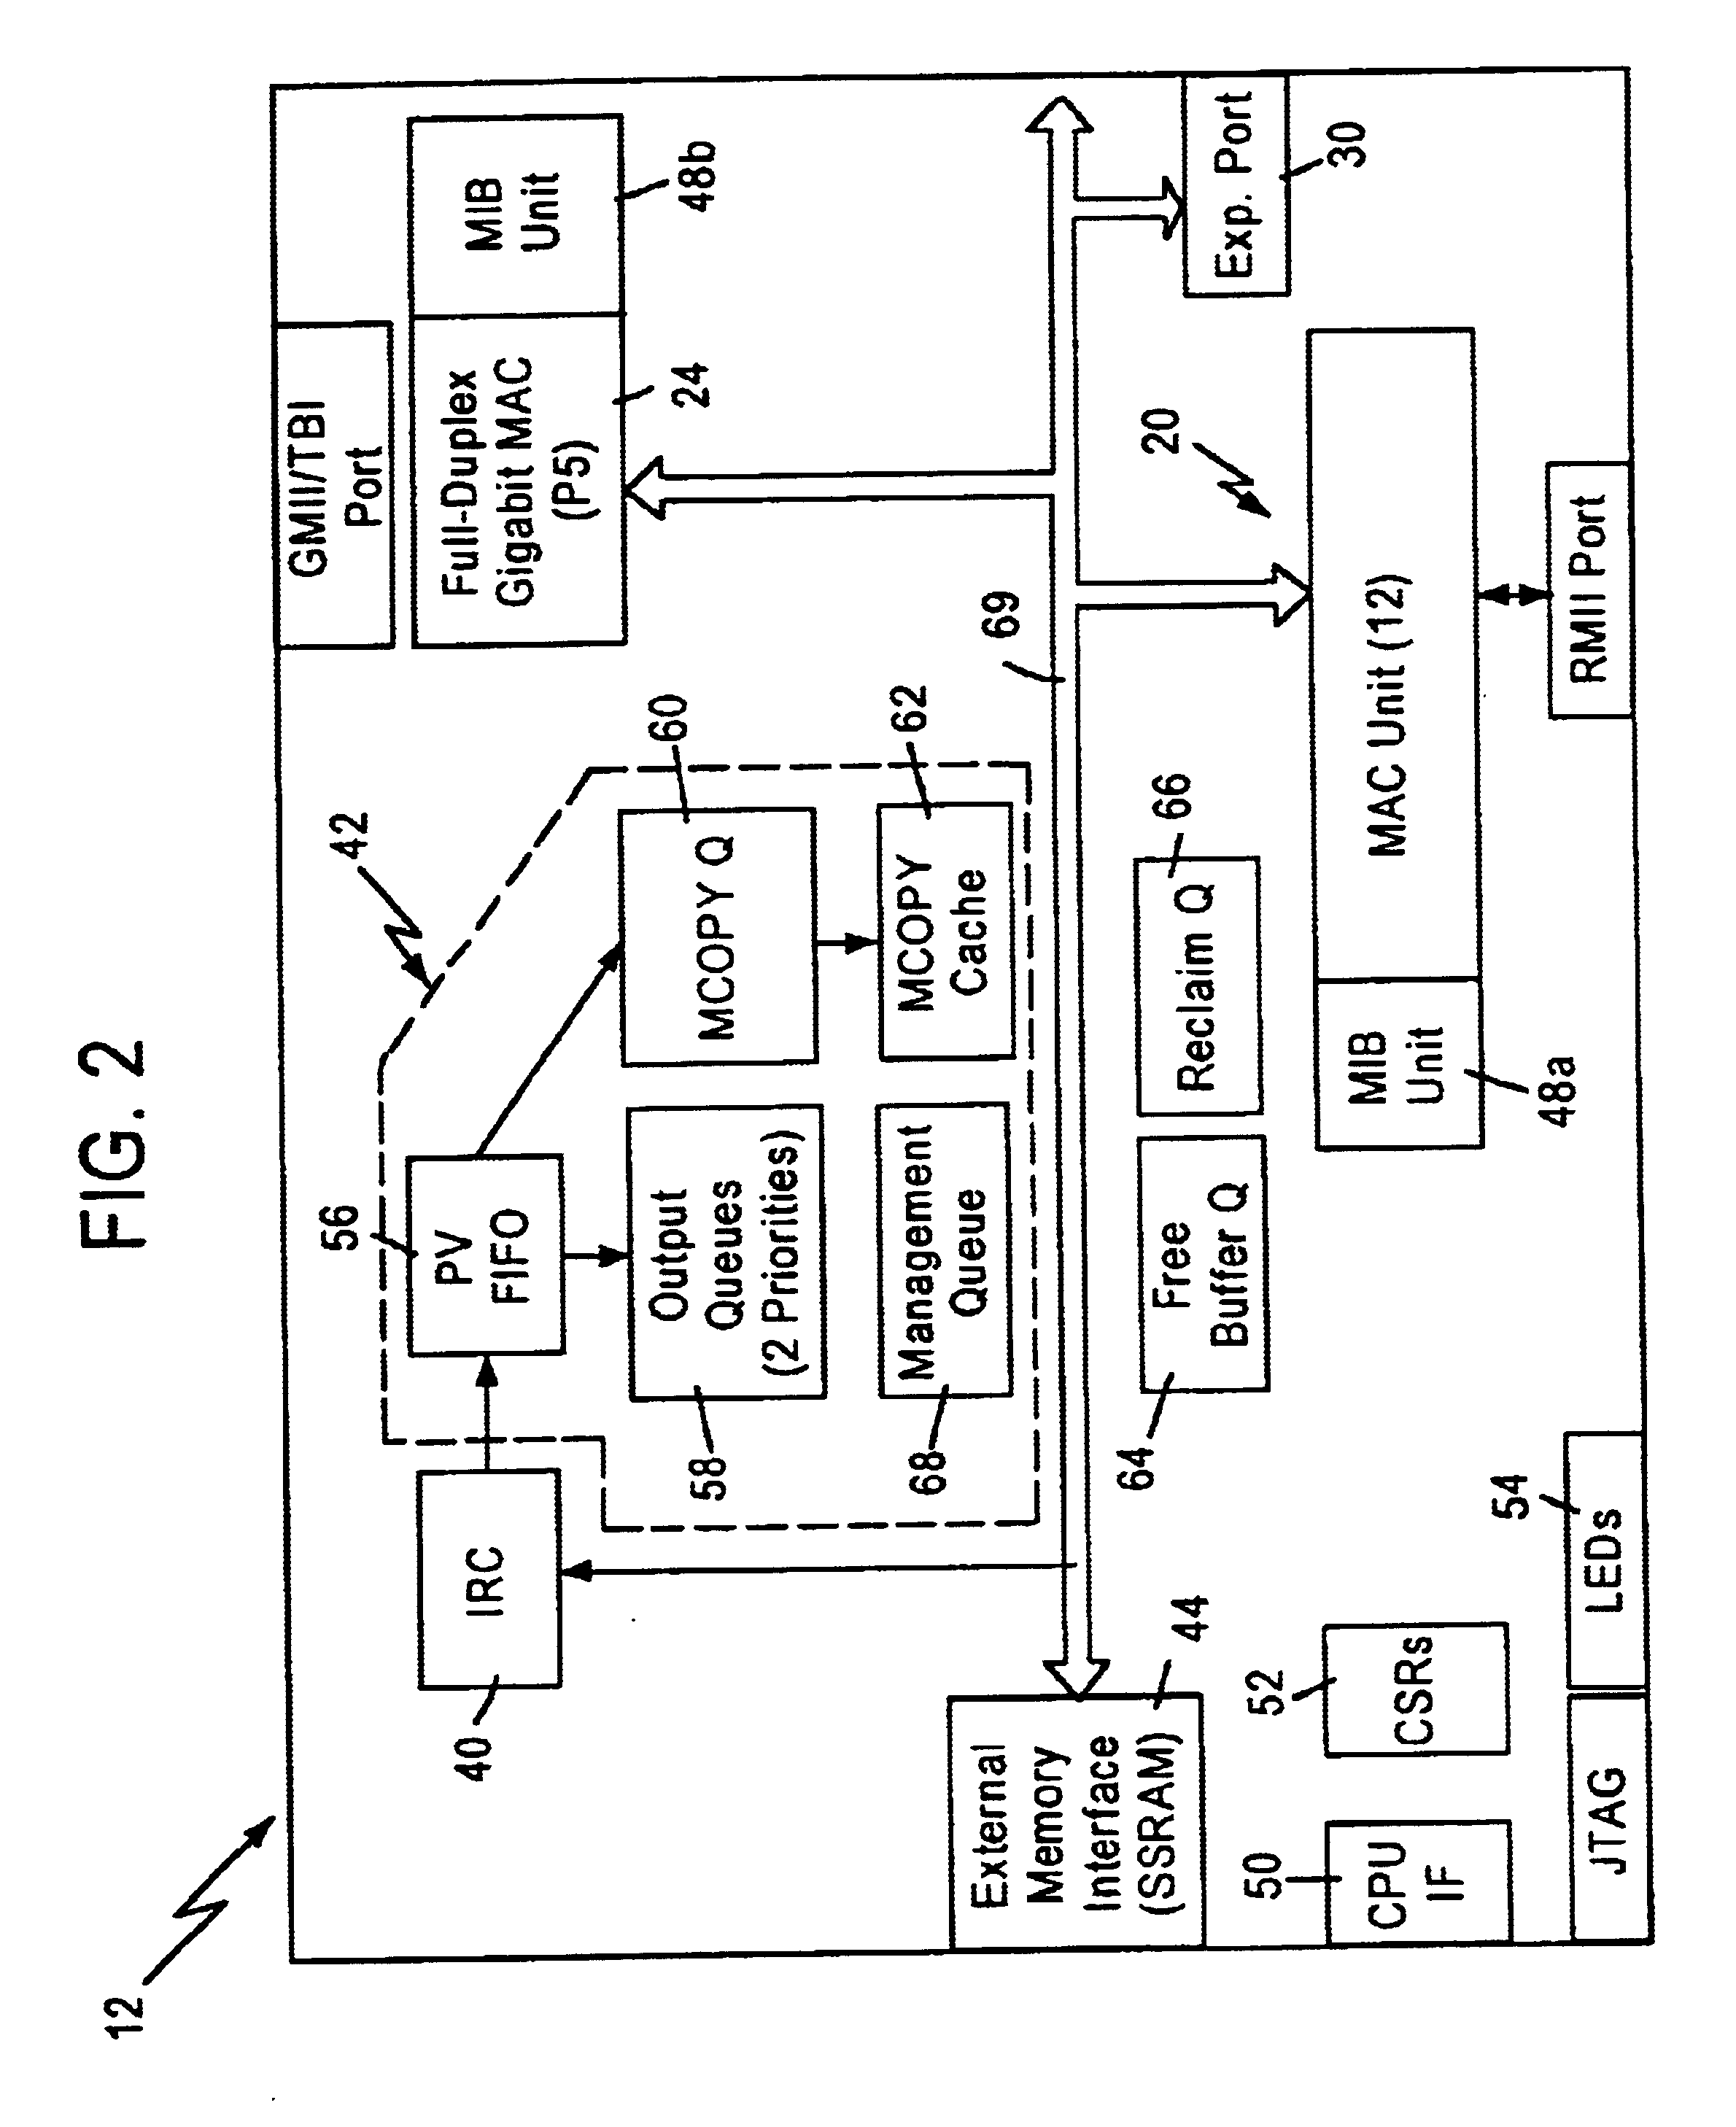 Method and apparatus for maintaining randomly accessible free buffer information for a network switch